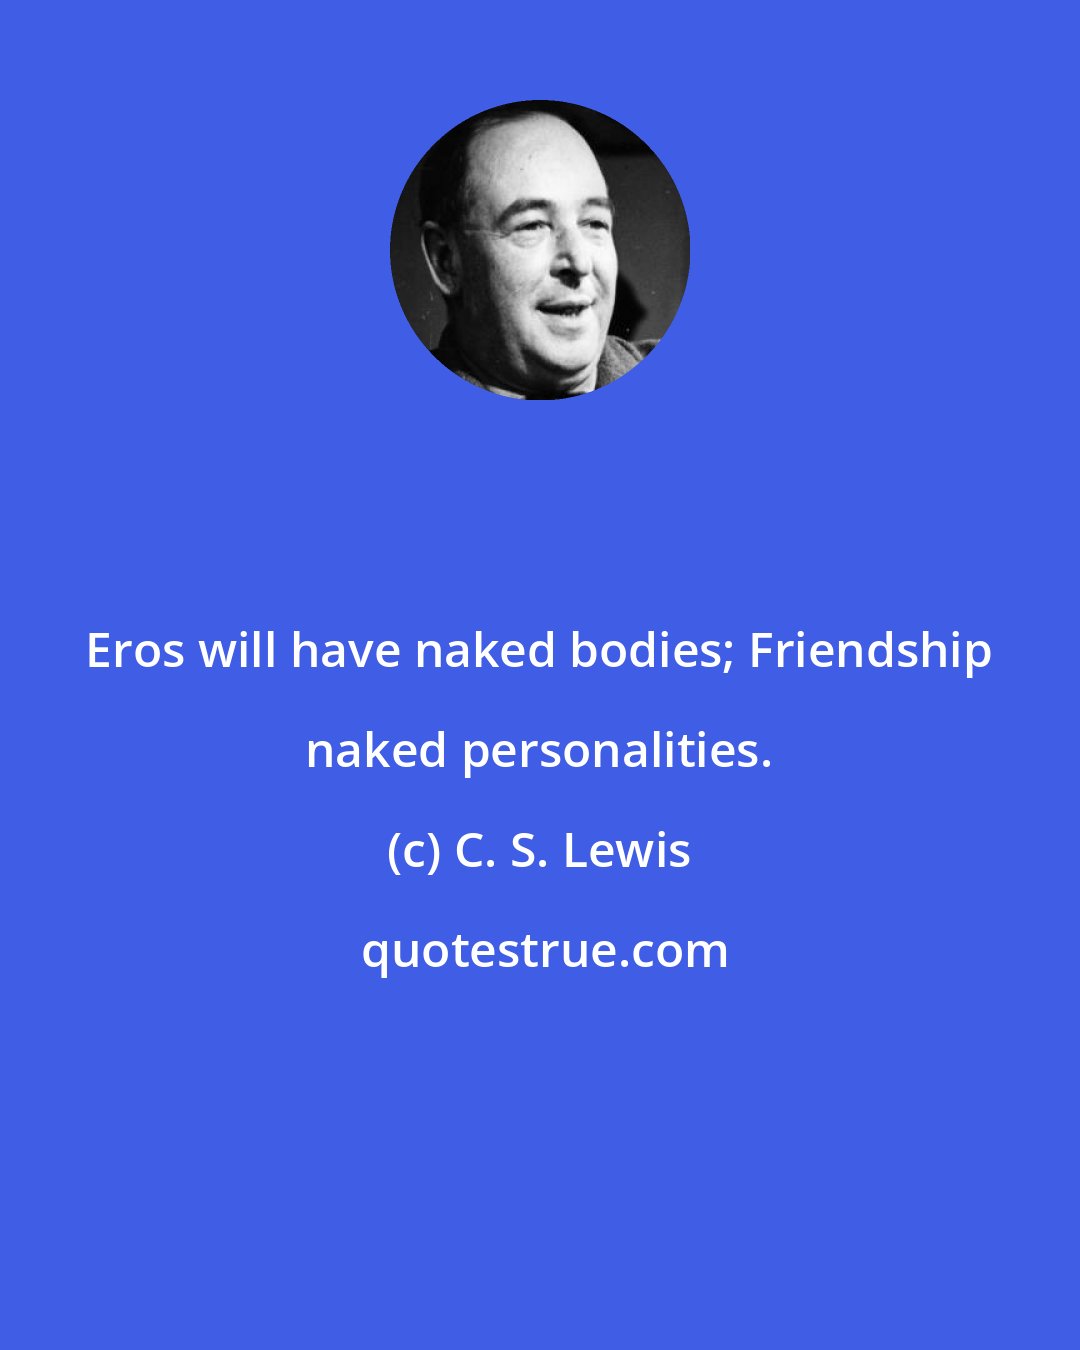 C. S. Lewis: Eros will have naked bodies; Friendship naked personalities.